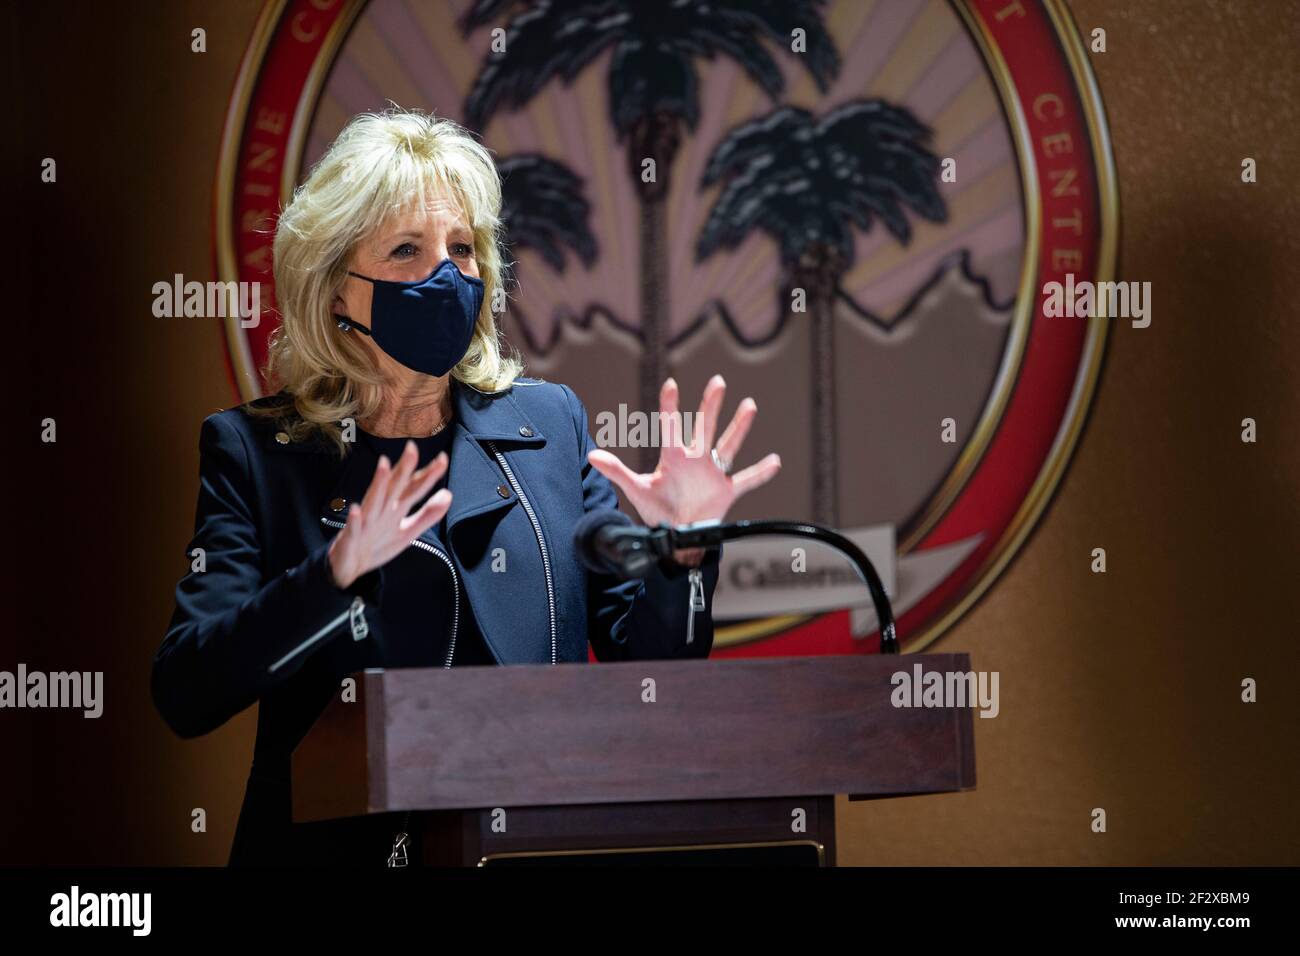 U.S First Lady Dr. Jill Biden addresses military spouses during her visit to the Marine Corps Air Ground Combat Center March 10, 2021 in Twentynine Palms, California. The First Lady visited the base to show support for military members and their families, and talk about the Joint Forces Initiative. Stock Photo